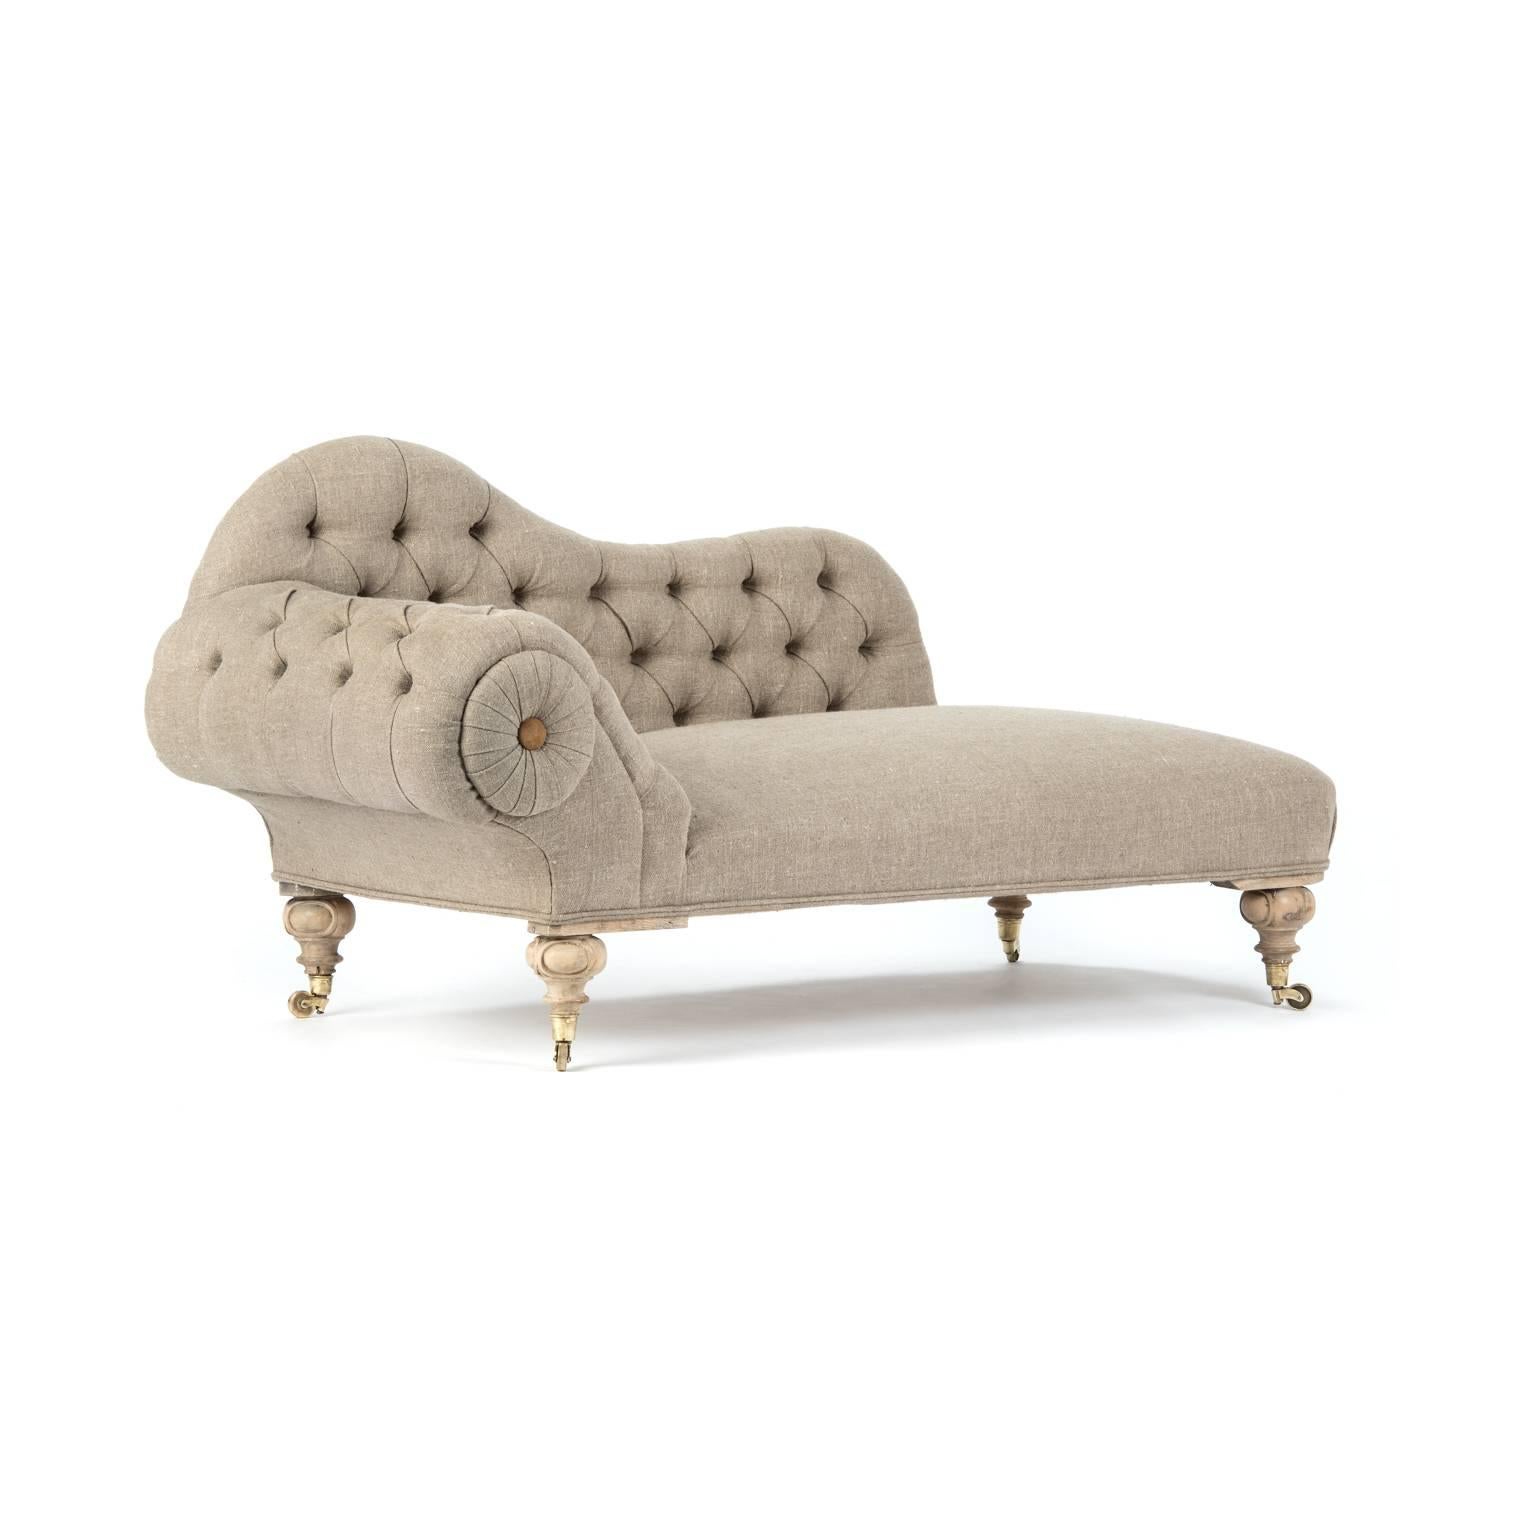 Unusual Victorian scroll arm deep buttoned tufted chaise longue reupholstered in a natural organic flax linen with padded arched back and piped detail, capped with an oversized whirl and suede button.

Bleached and waxed legs resting on original